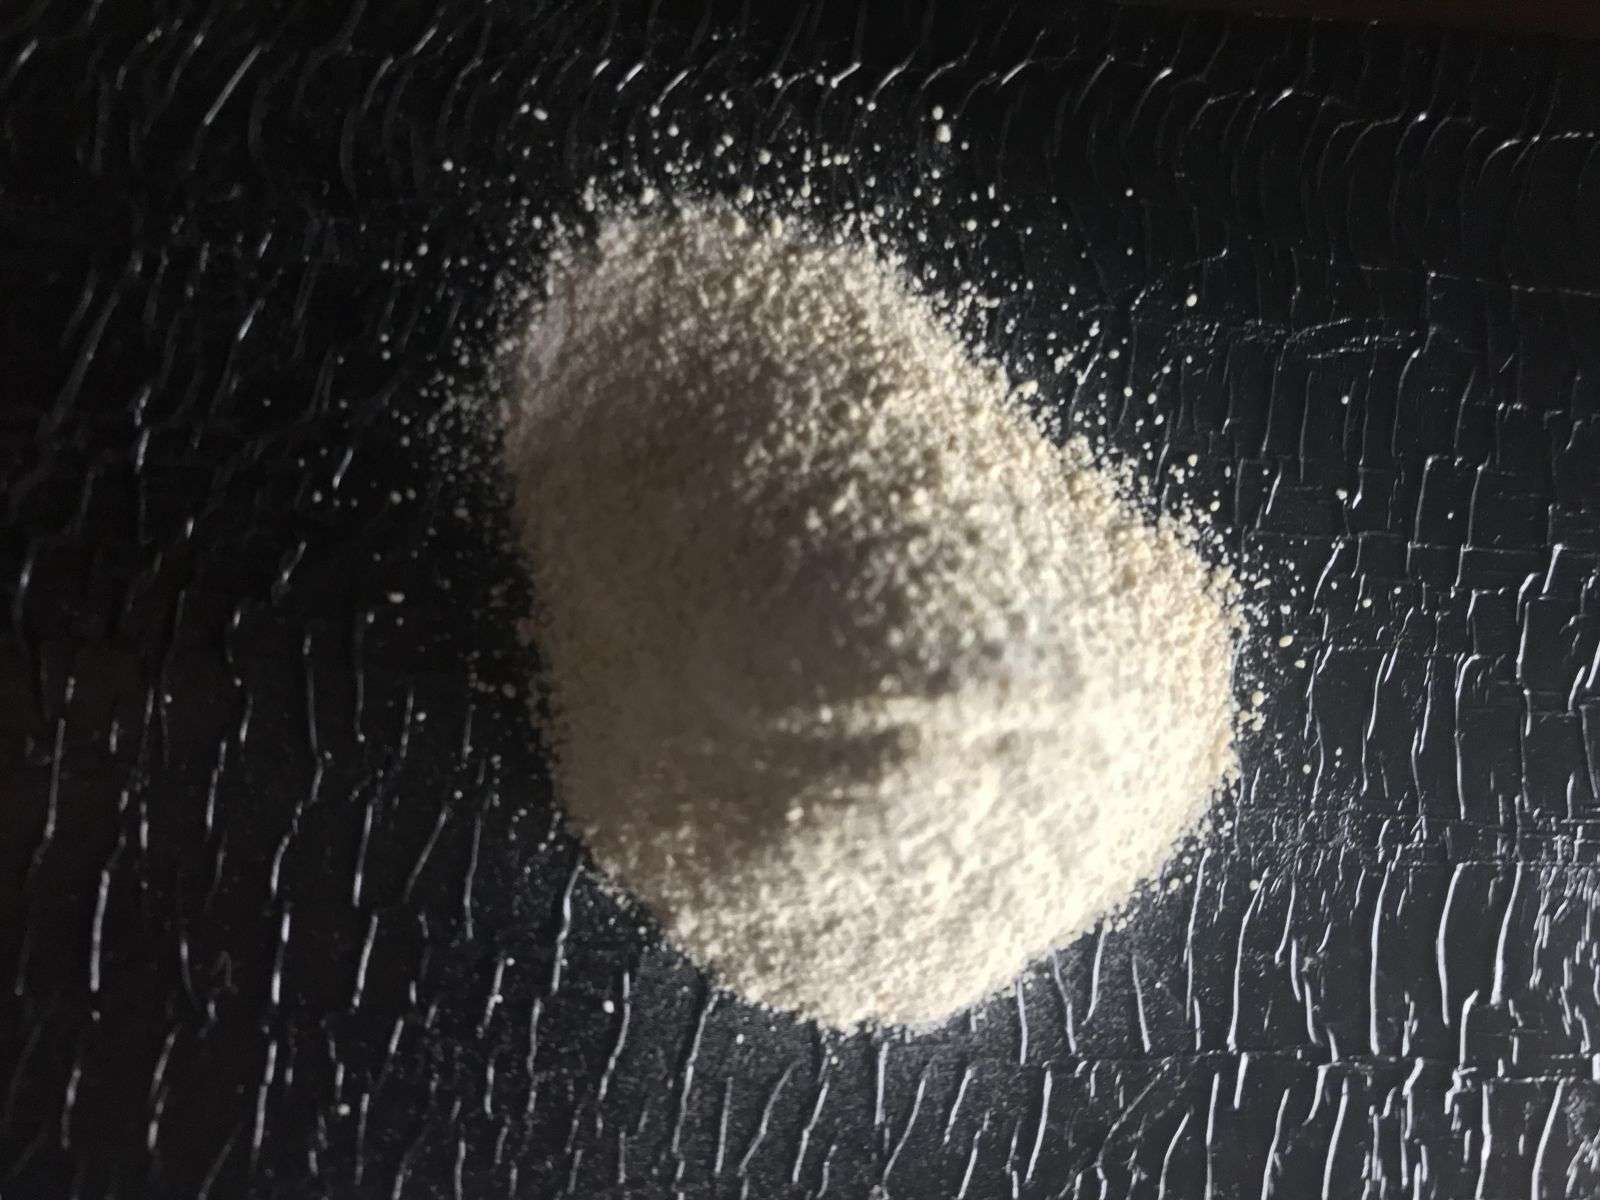 Carboxymethyl cellulose CMC